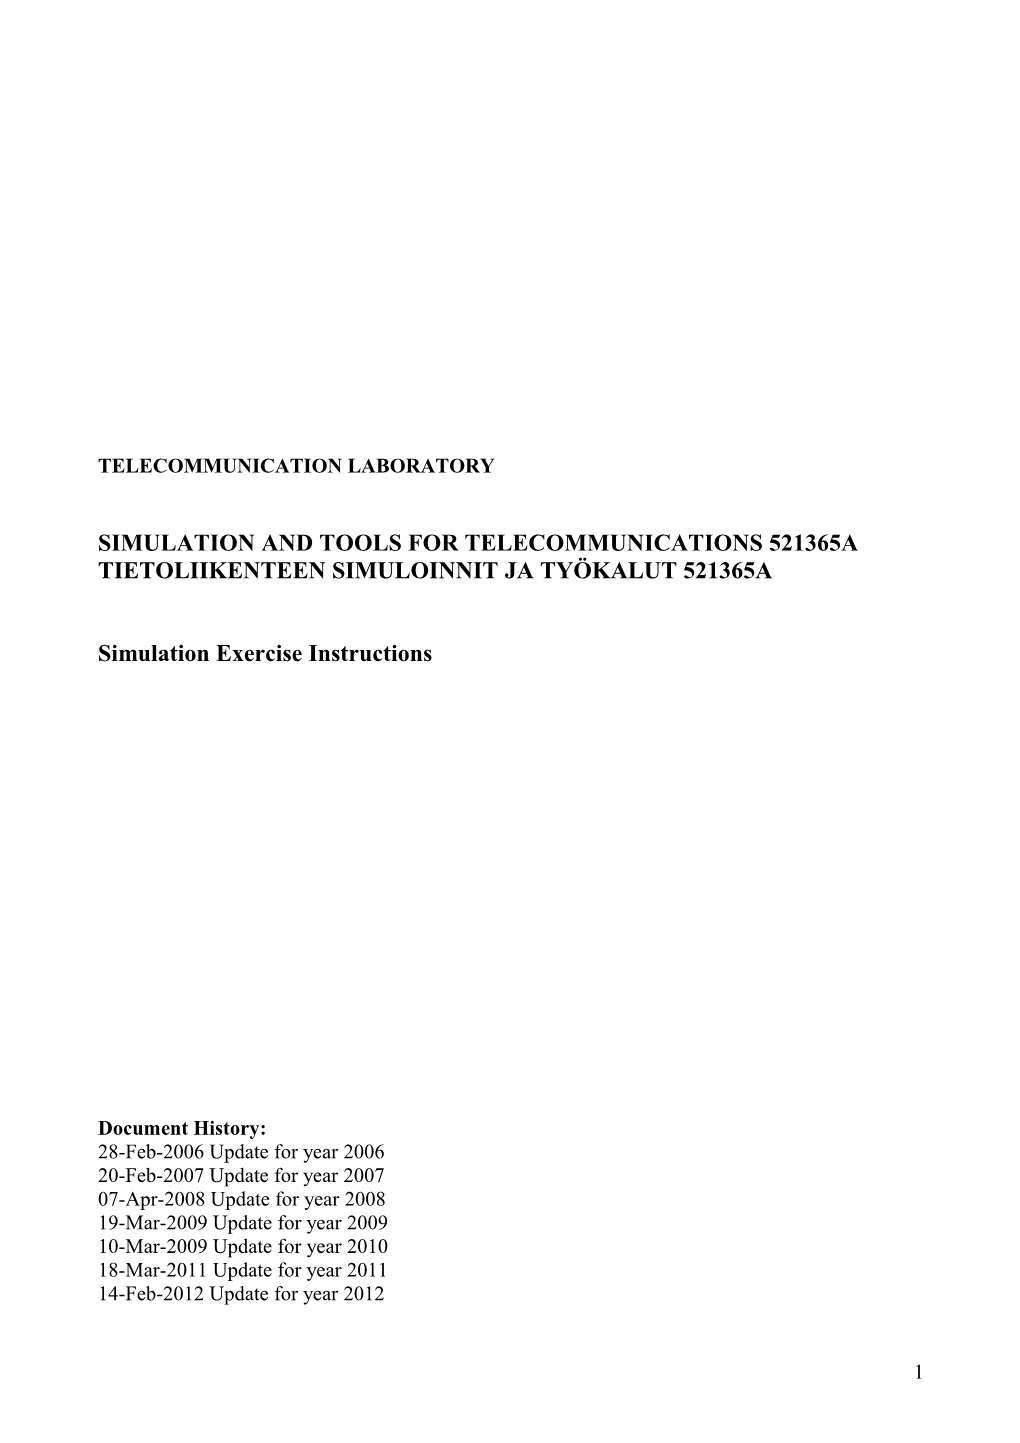 Simulation and Tools for Telecommunications 521365A